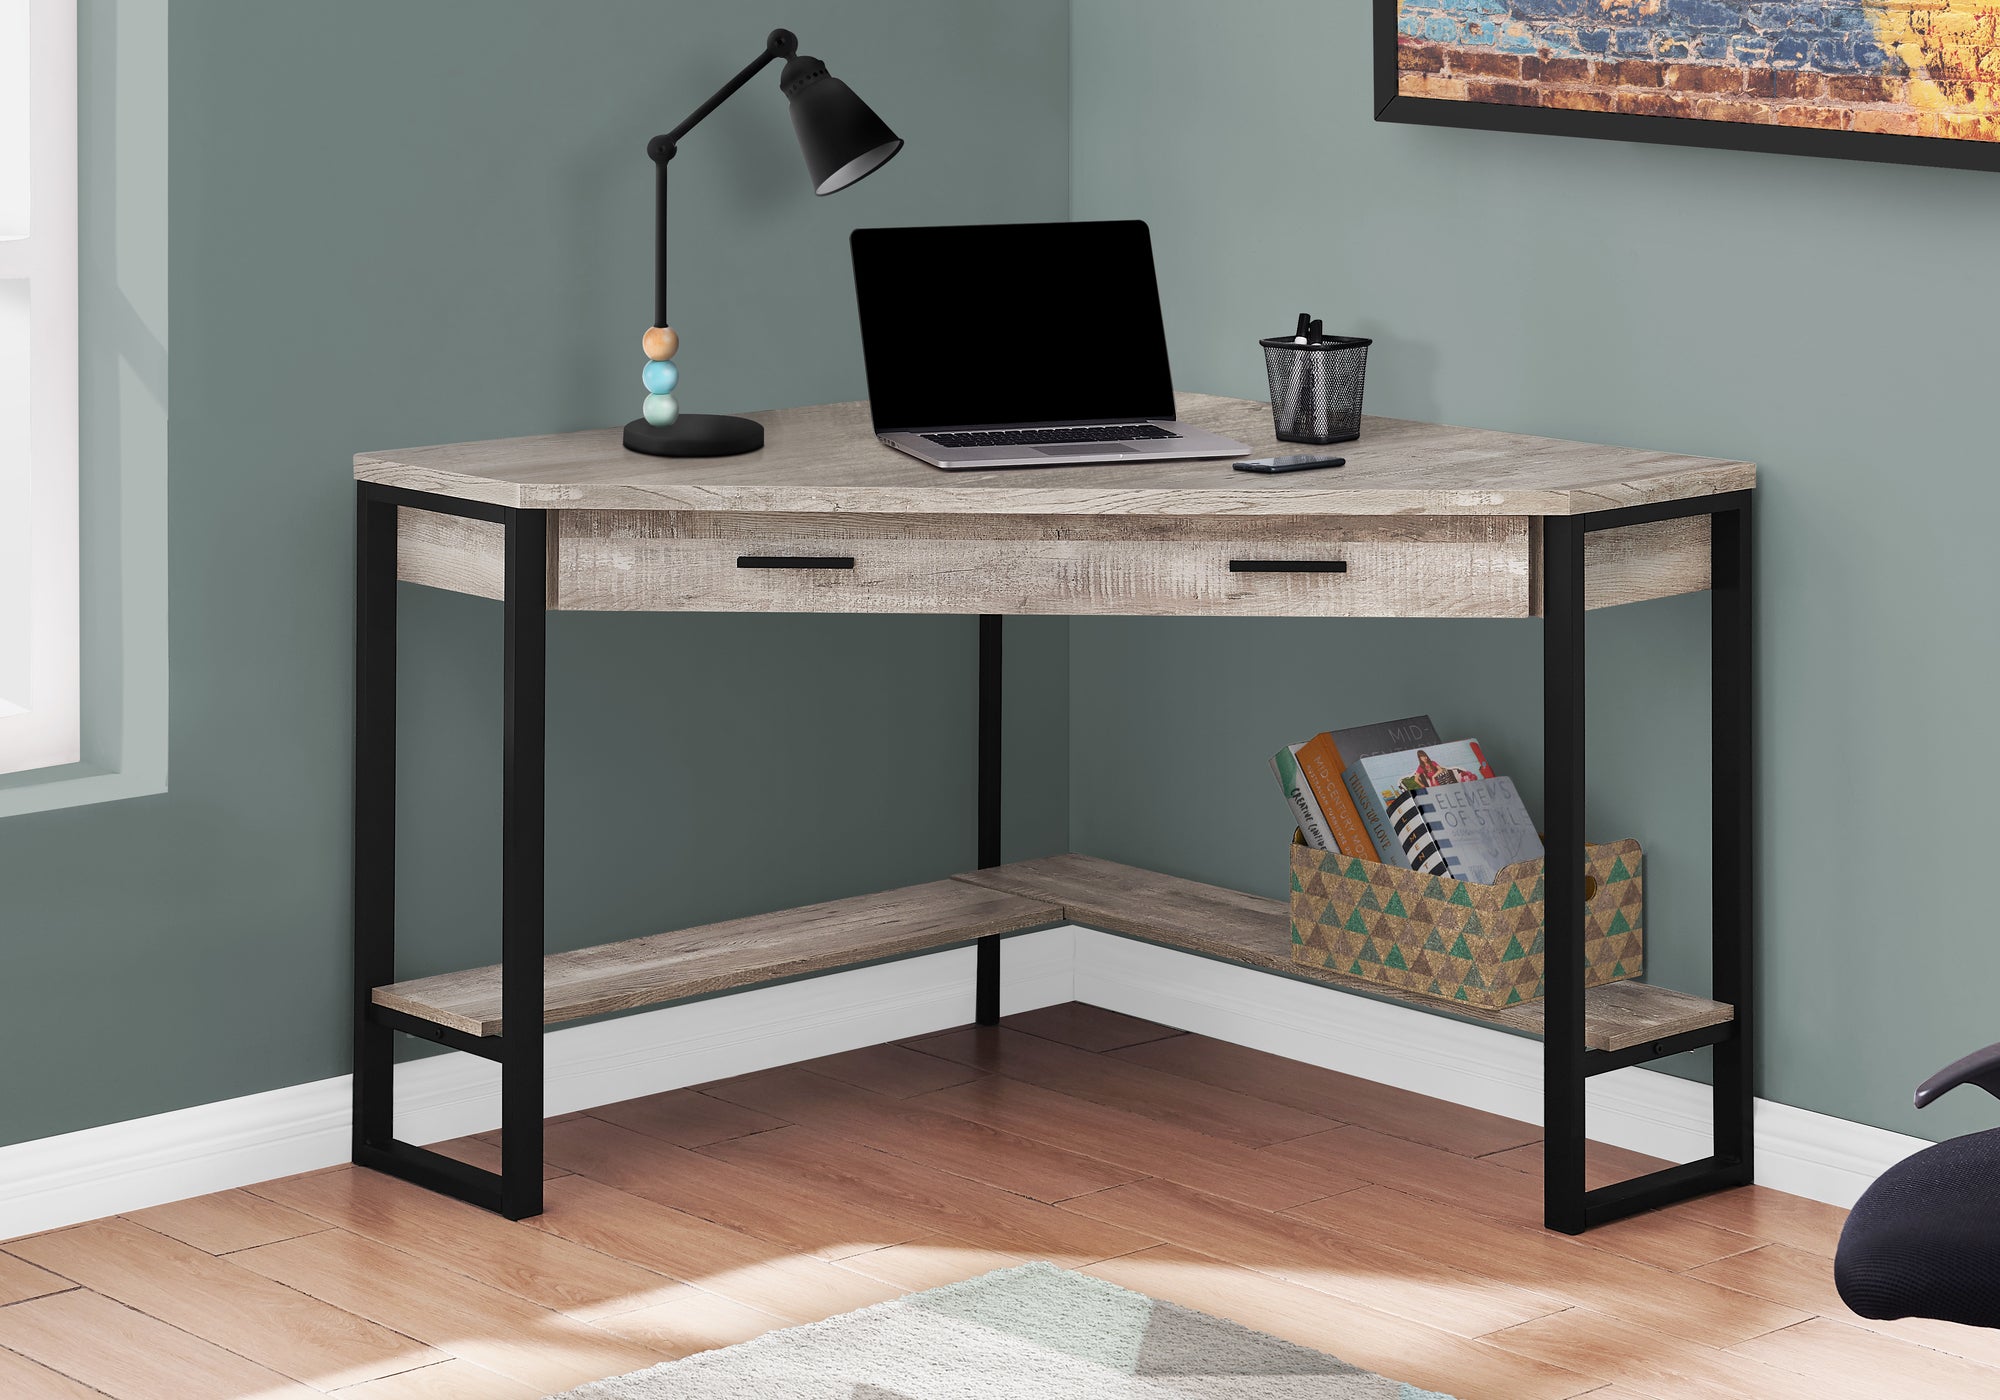 MN-527506    Computer Desk, Home Office, Corner, Storage Drawers, 42"L, L Shape, Metal, Laminate, Taupe Reclaimed Wood Look, Black, Contemporary, Modern